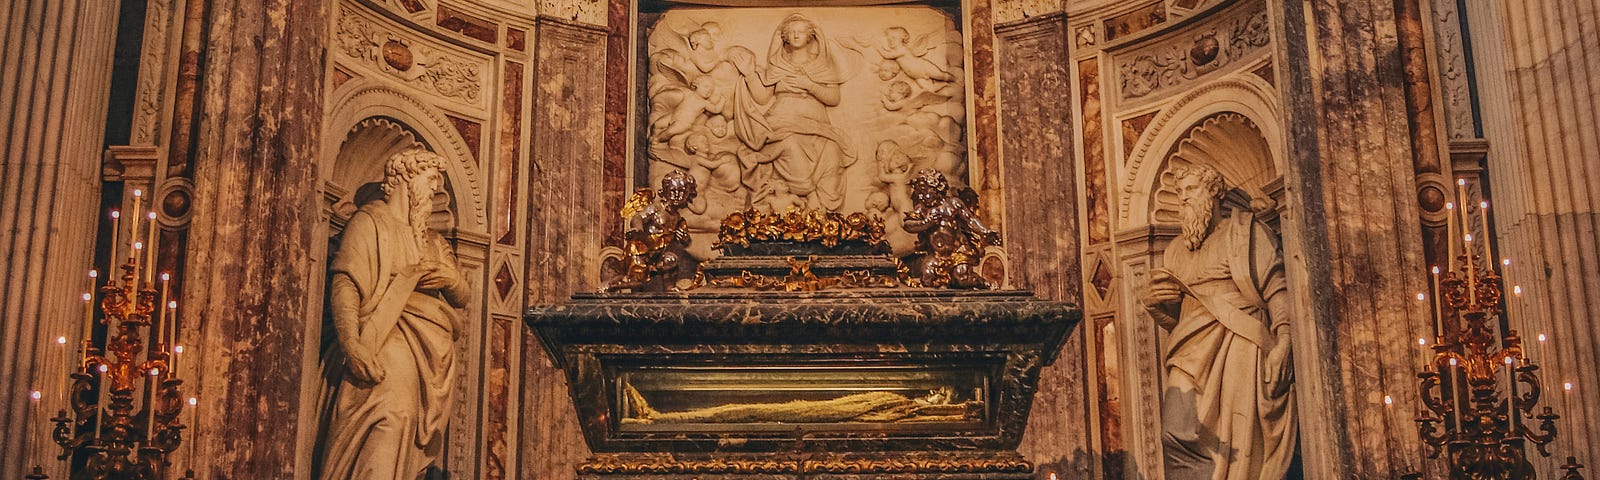 Antique classical tomb inside a domed ornate church.